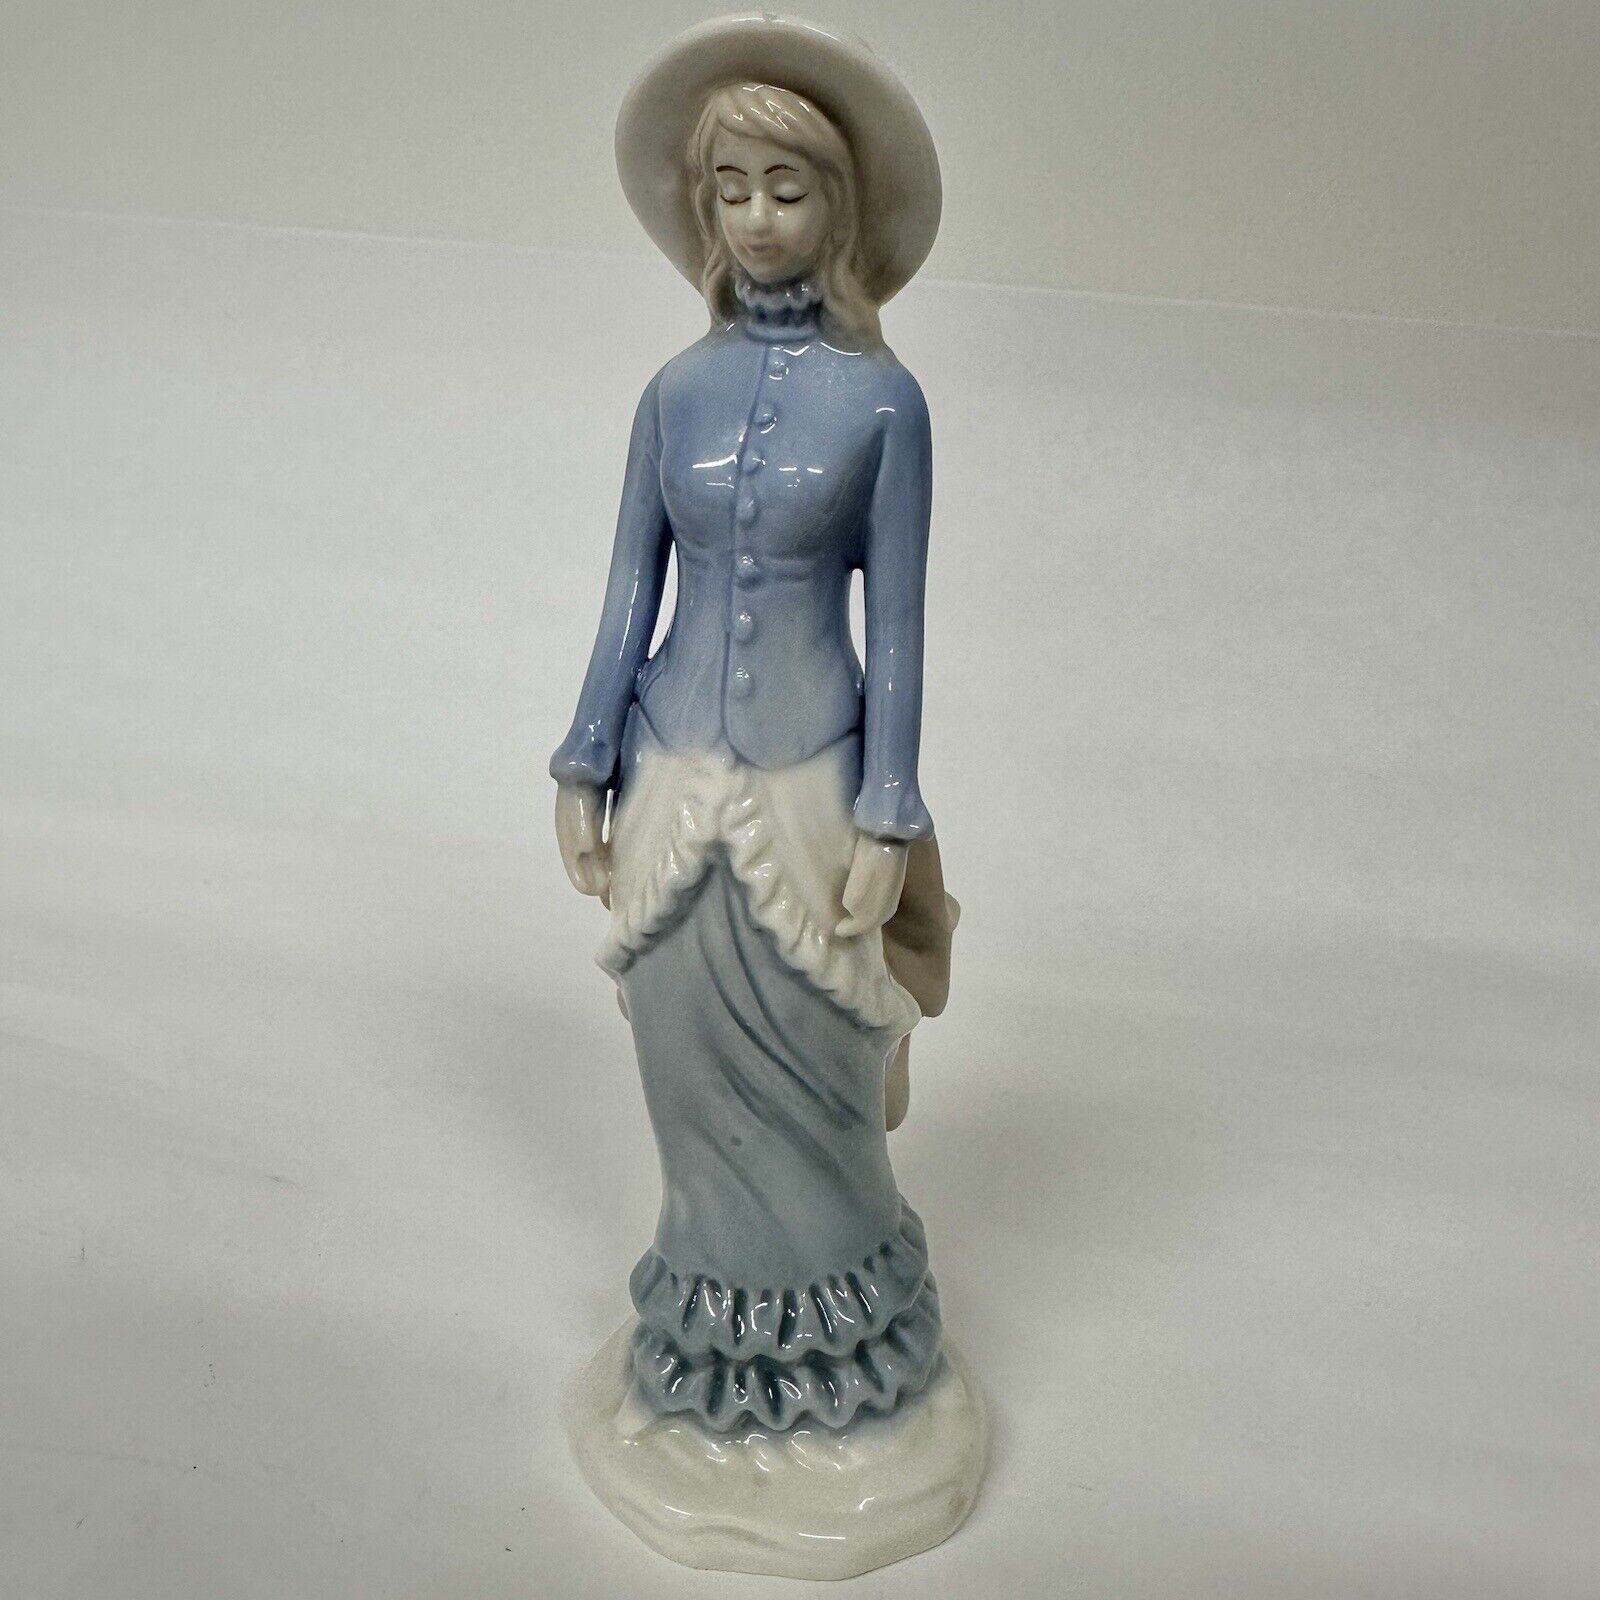 Greenbrier Porcelain Victorian Lady Figurine 7” Powder Blue and White Dress